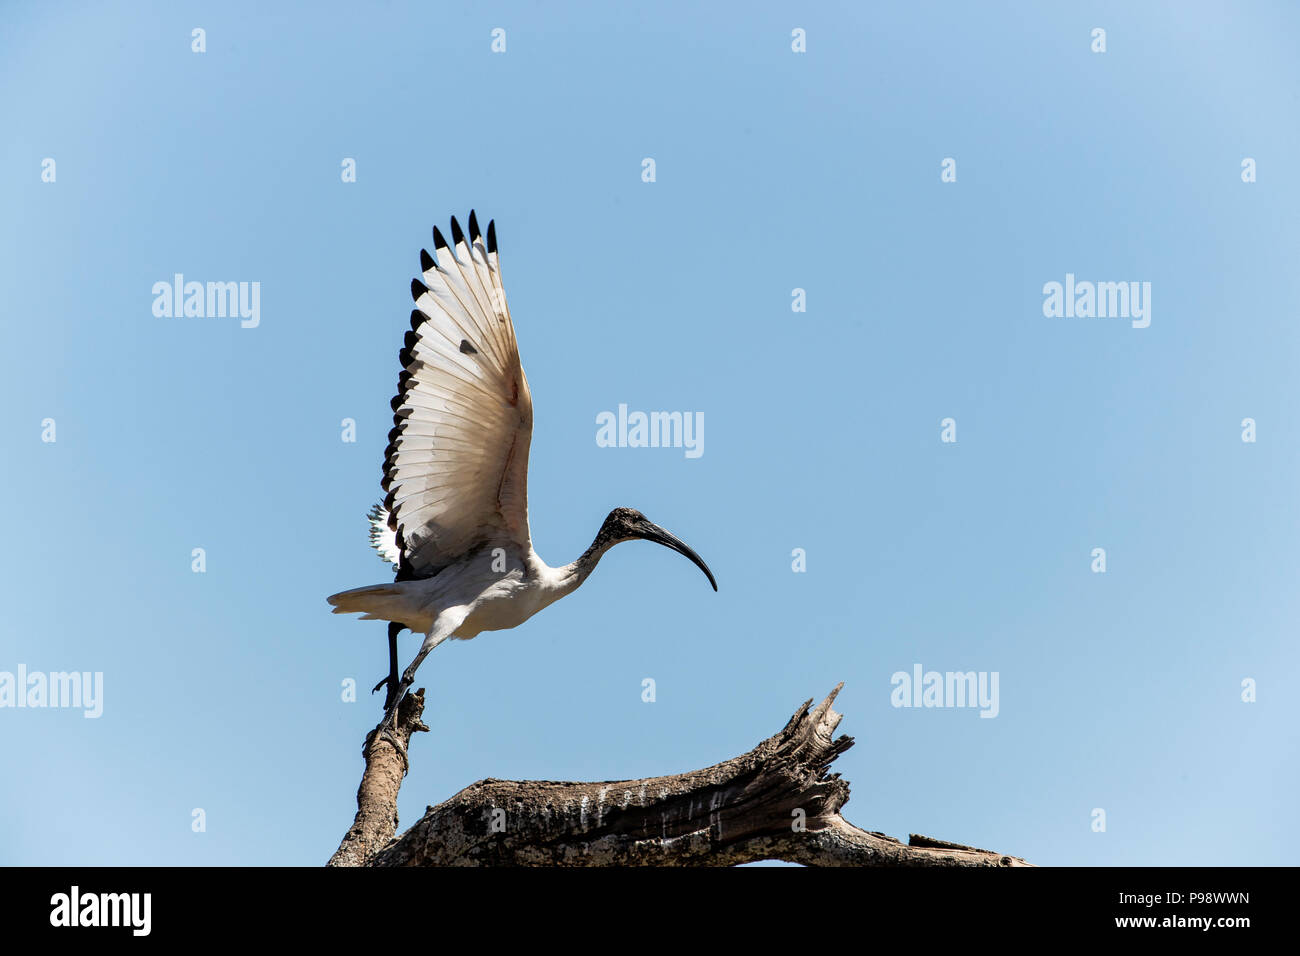 African Sacred Ibis takes off from a branch, Mana Pools, Zimbabwe Stock Photo